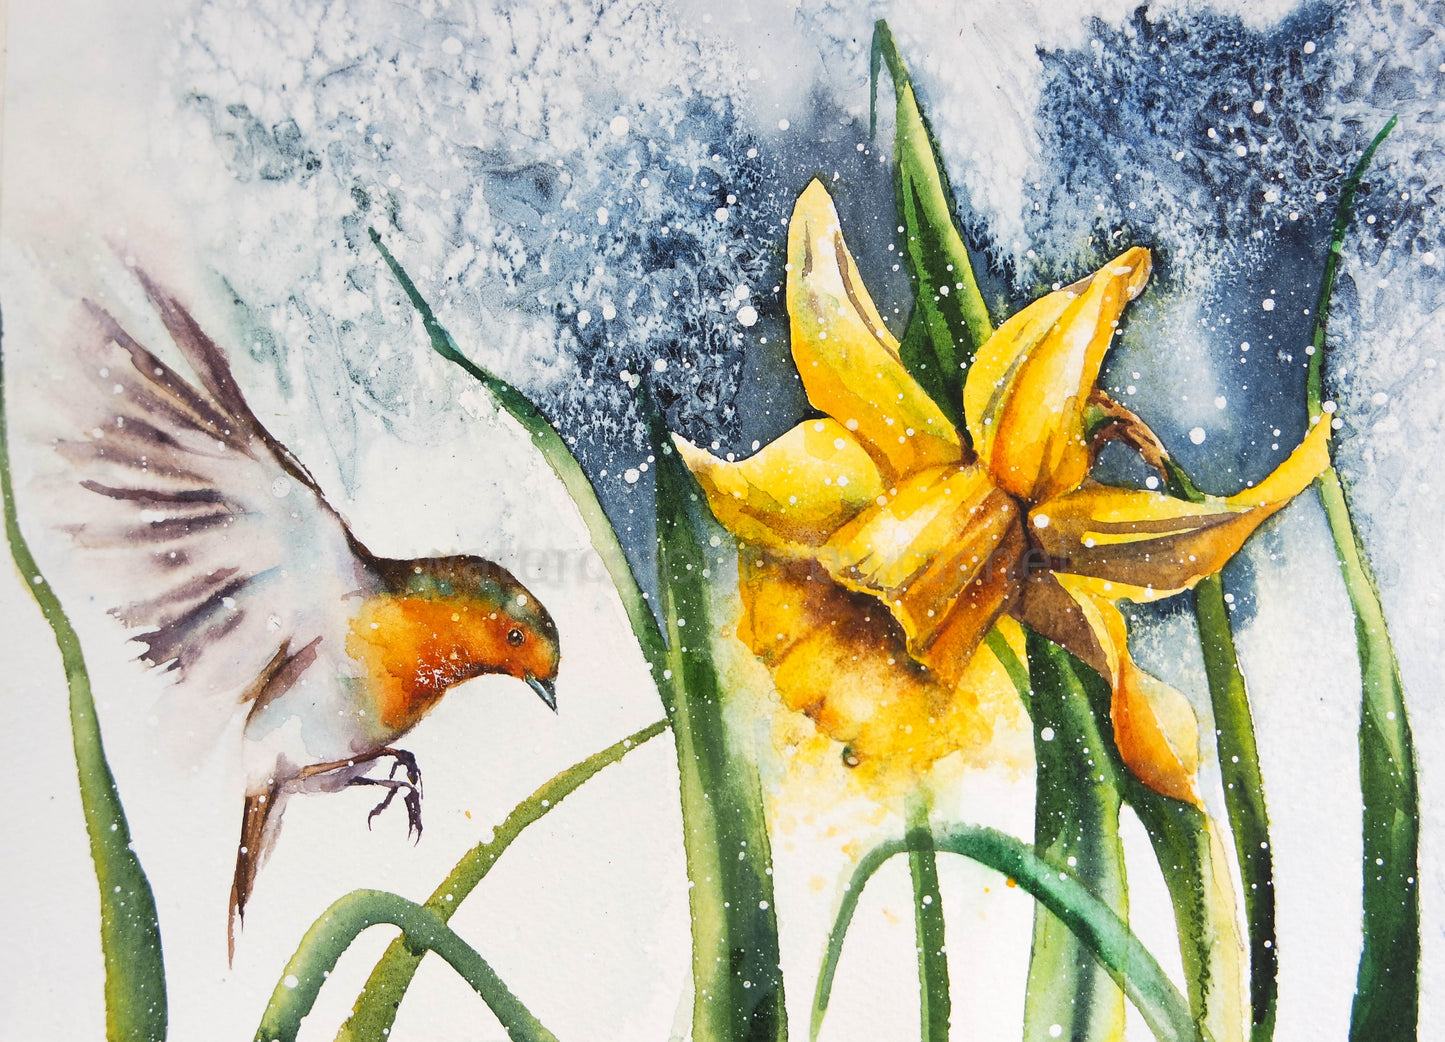 Spring robin, and a daffodil